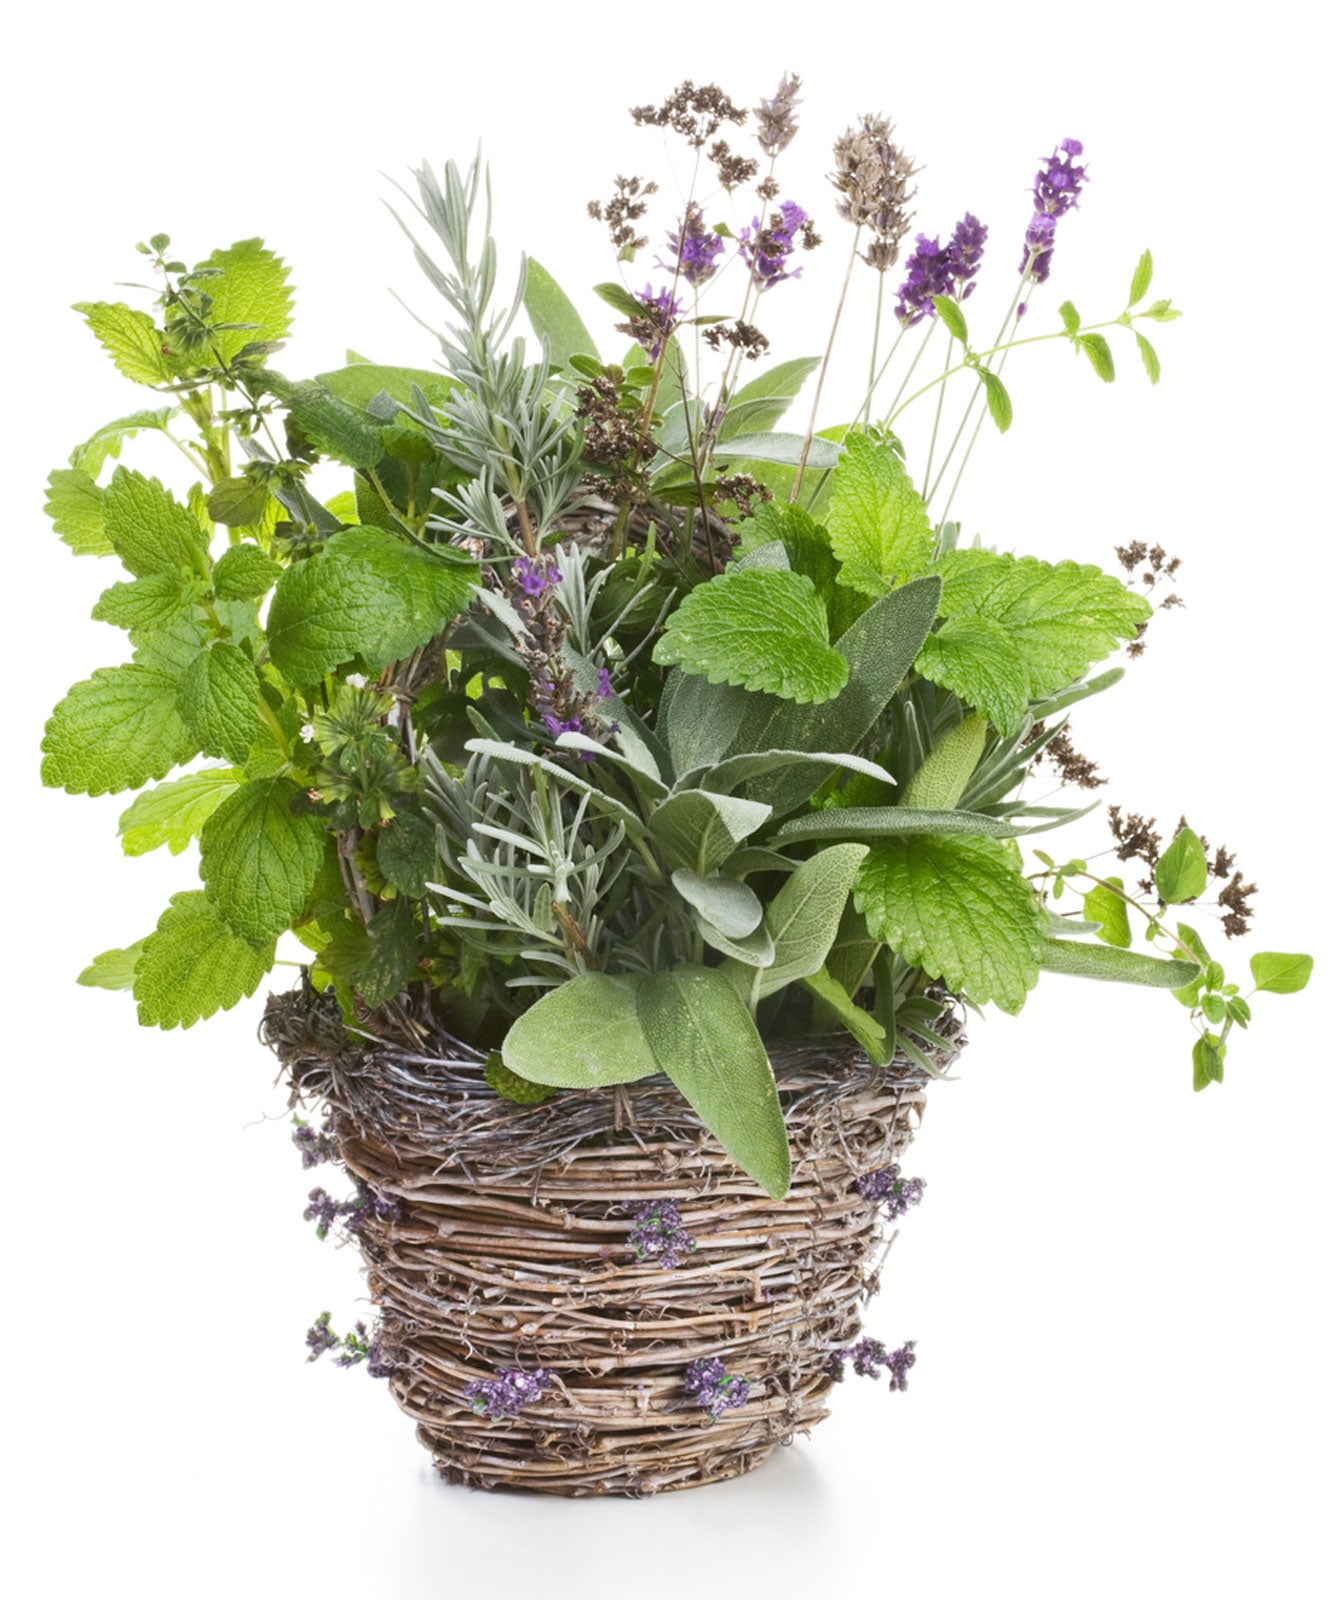 How to use basket as indoor planter